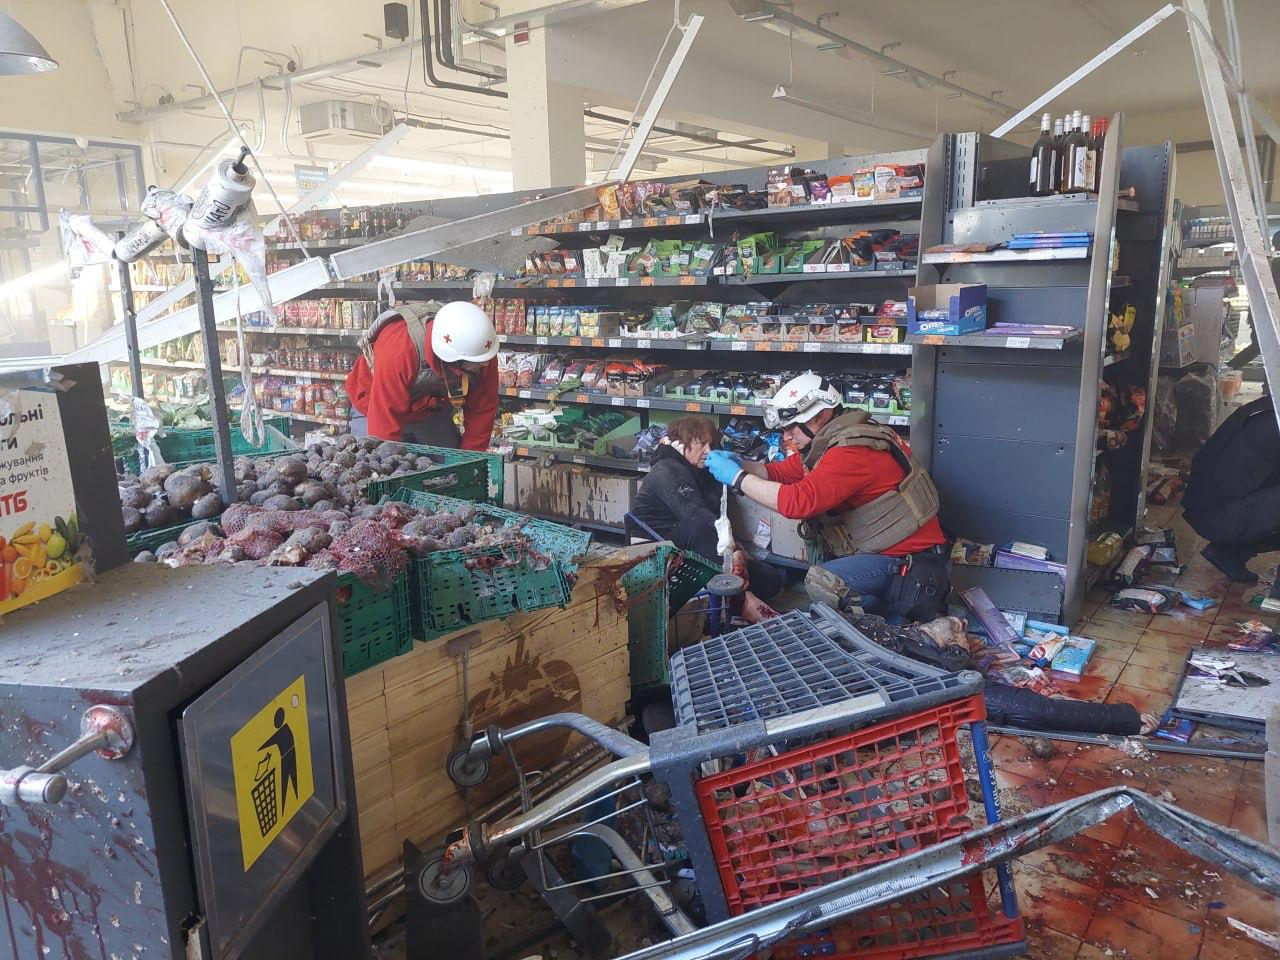 Russians Shelled a Supermarket in Kherson, Ukraine - May 2, 2023